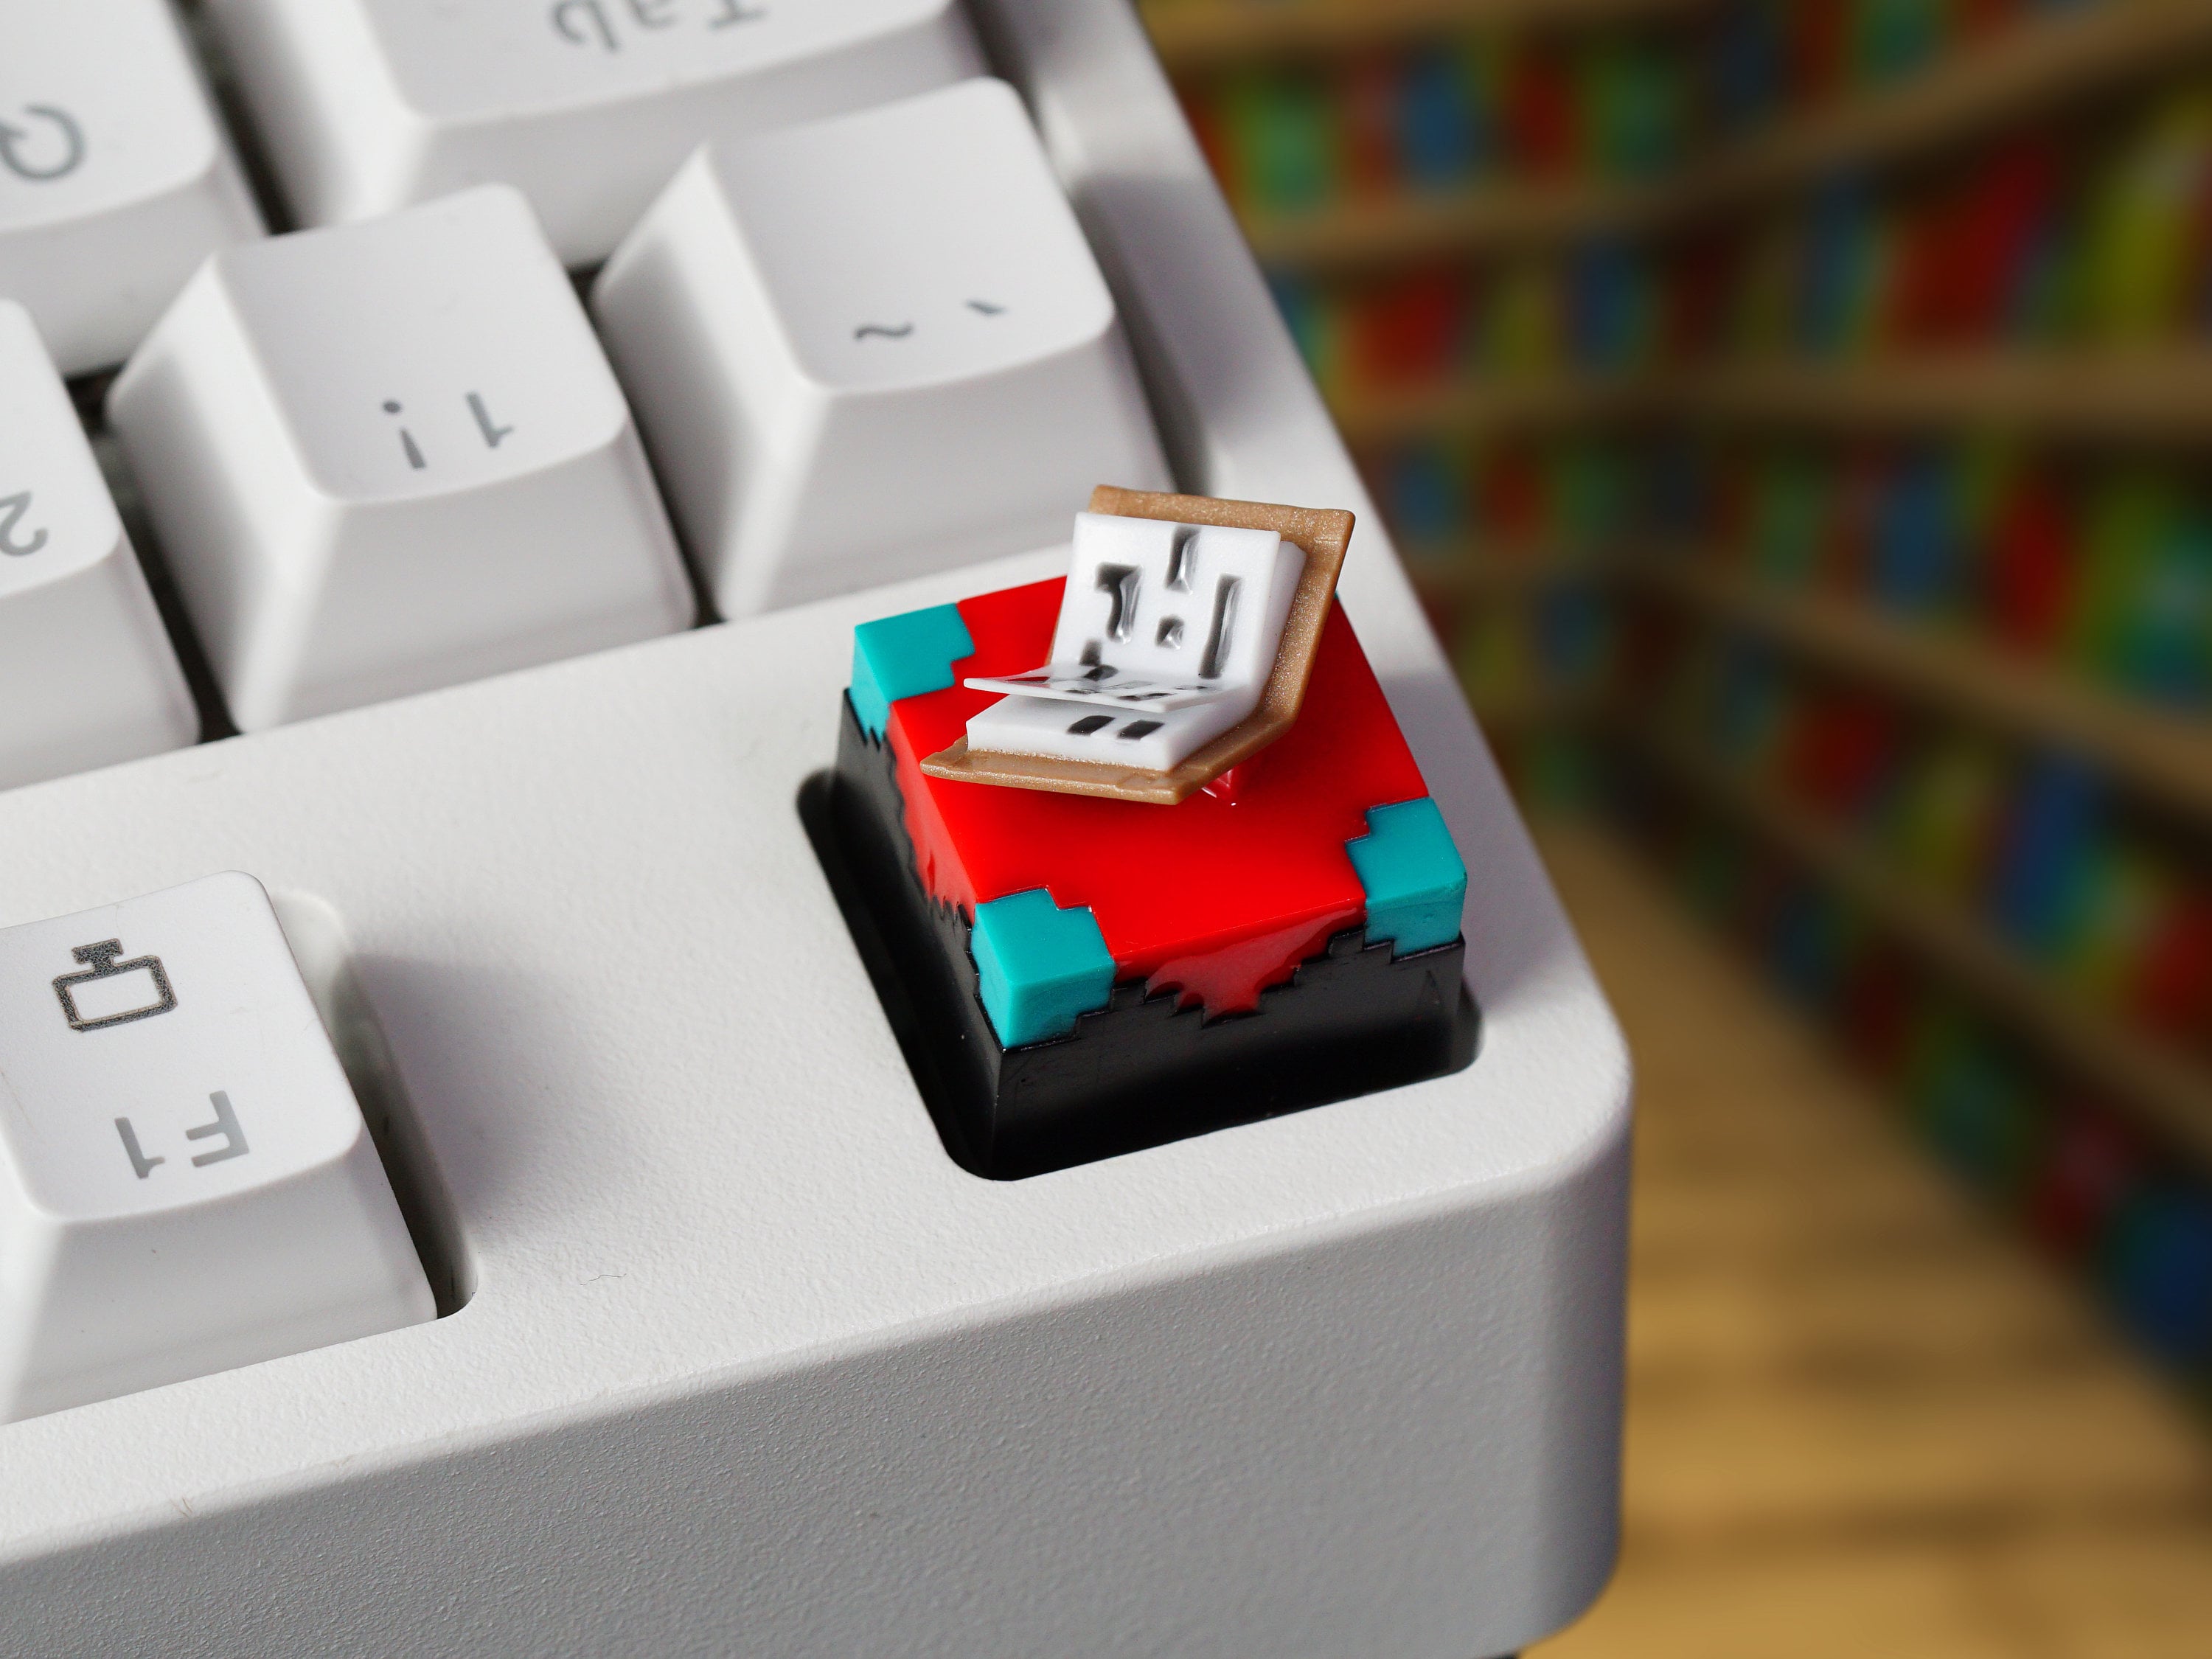 En-chan.ted B.ook Keycap, Mine-Craft Keycap, Gaming Keycap, Keycap For Cherry MX Switches Mechanical Keyboard, Gift for Him